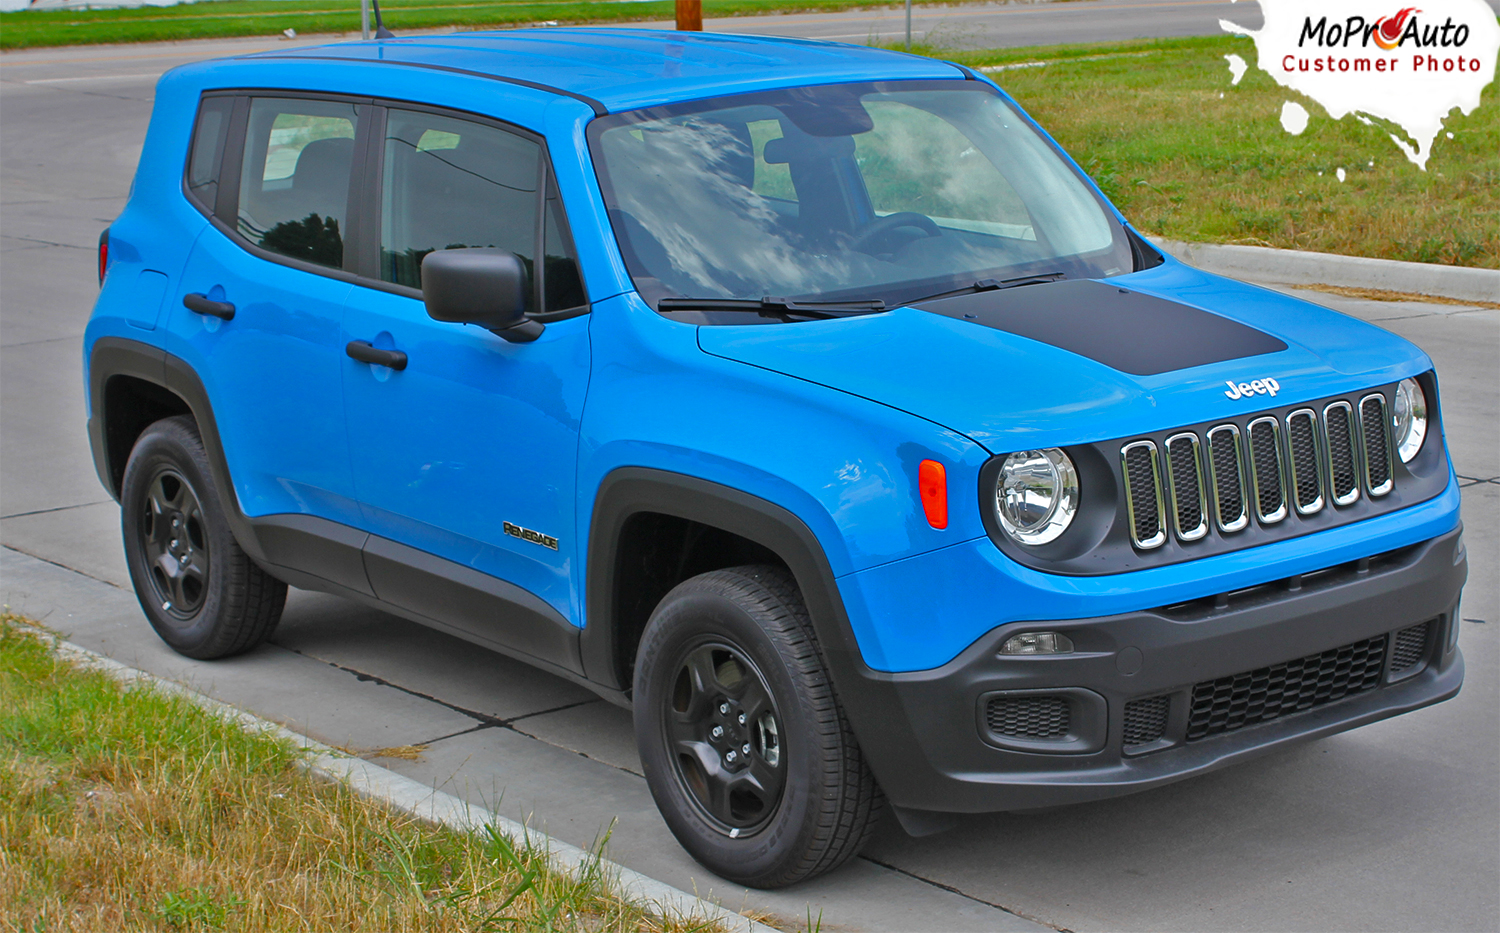 RENEGADE HOOD Jeep Renegade Hood Graphic - MoProAuto Pro Design Series Vinyl Graphics, Stripes and Decals Kit